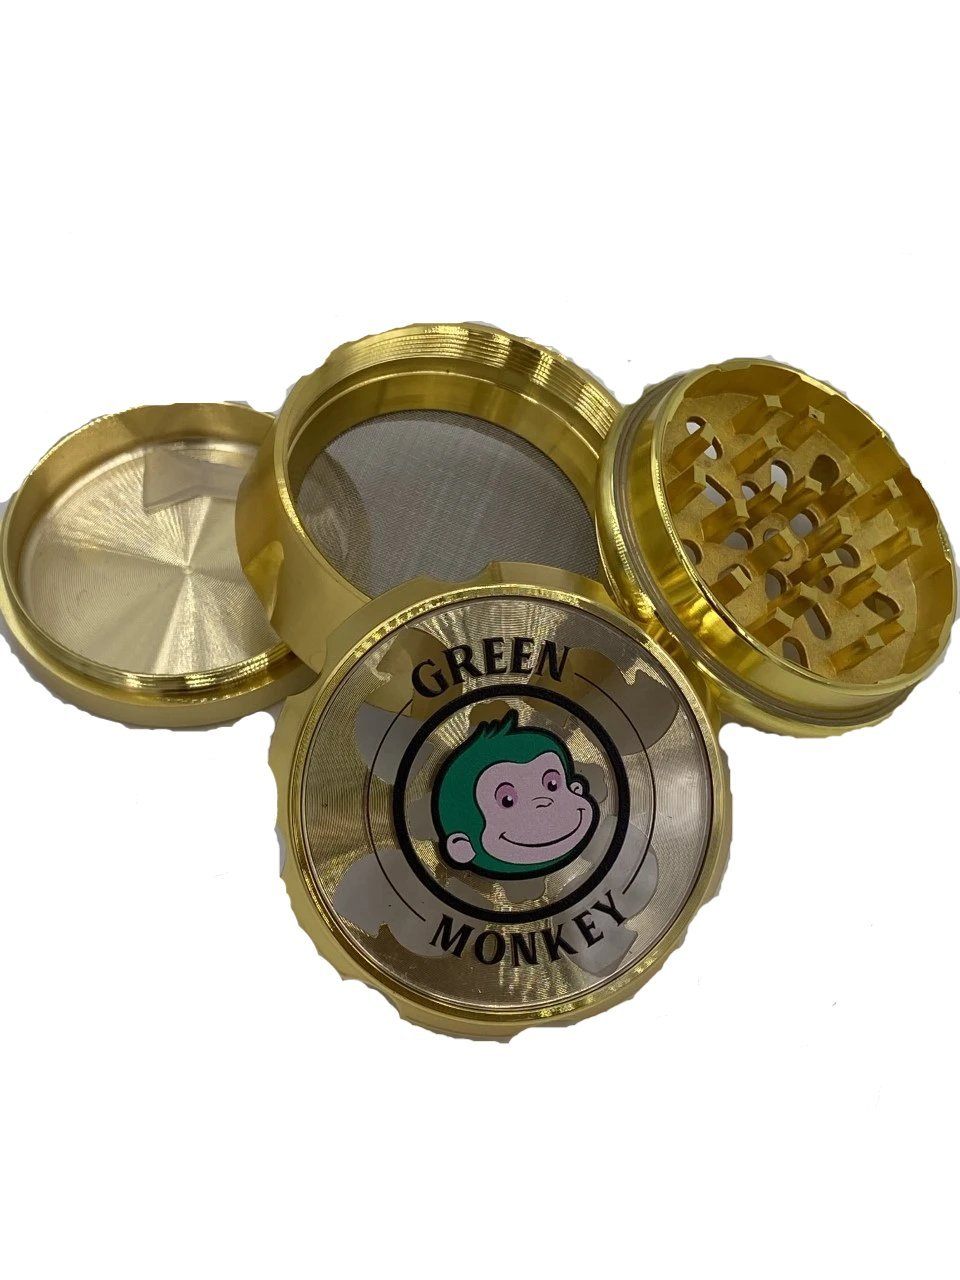 Green Monkey Herb Grinder Baboon Crown Series 63mm Various Colors Flower Power Packages Gold 